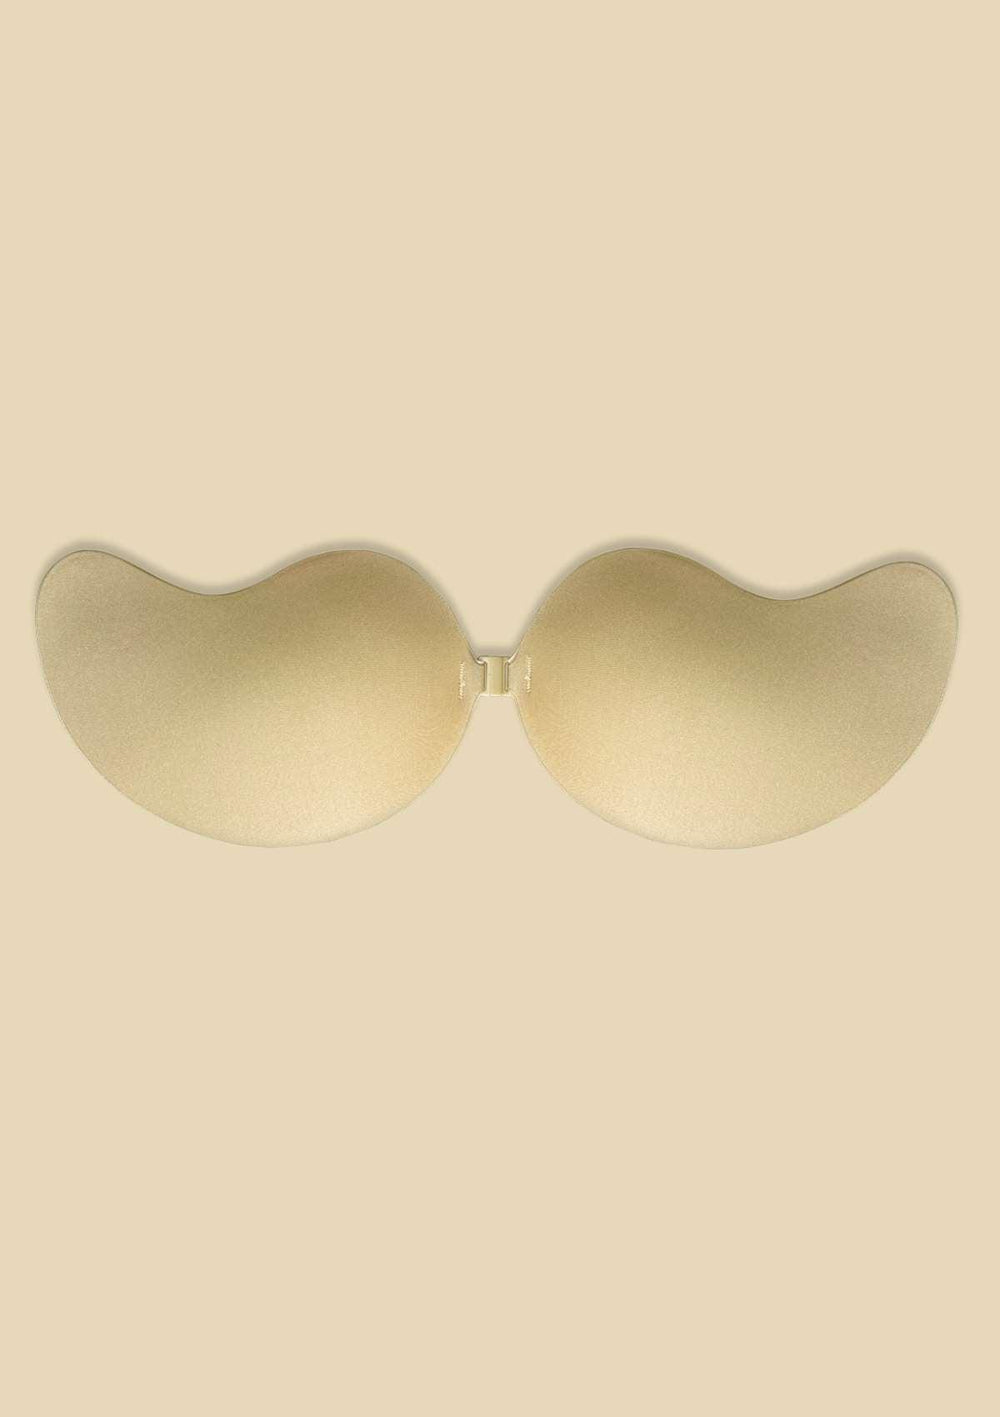 HSIA Strapless Backless Adhesive Sticky Bra